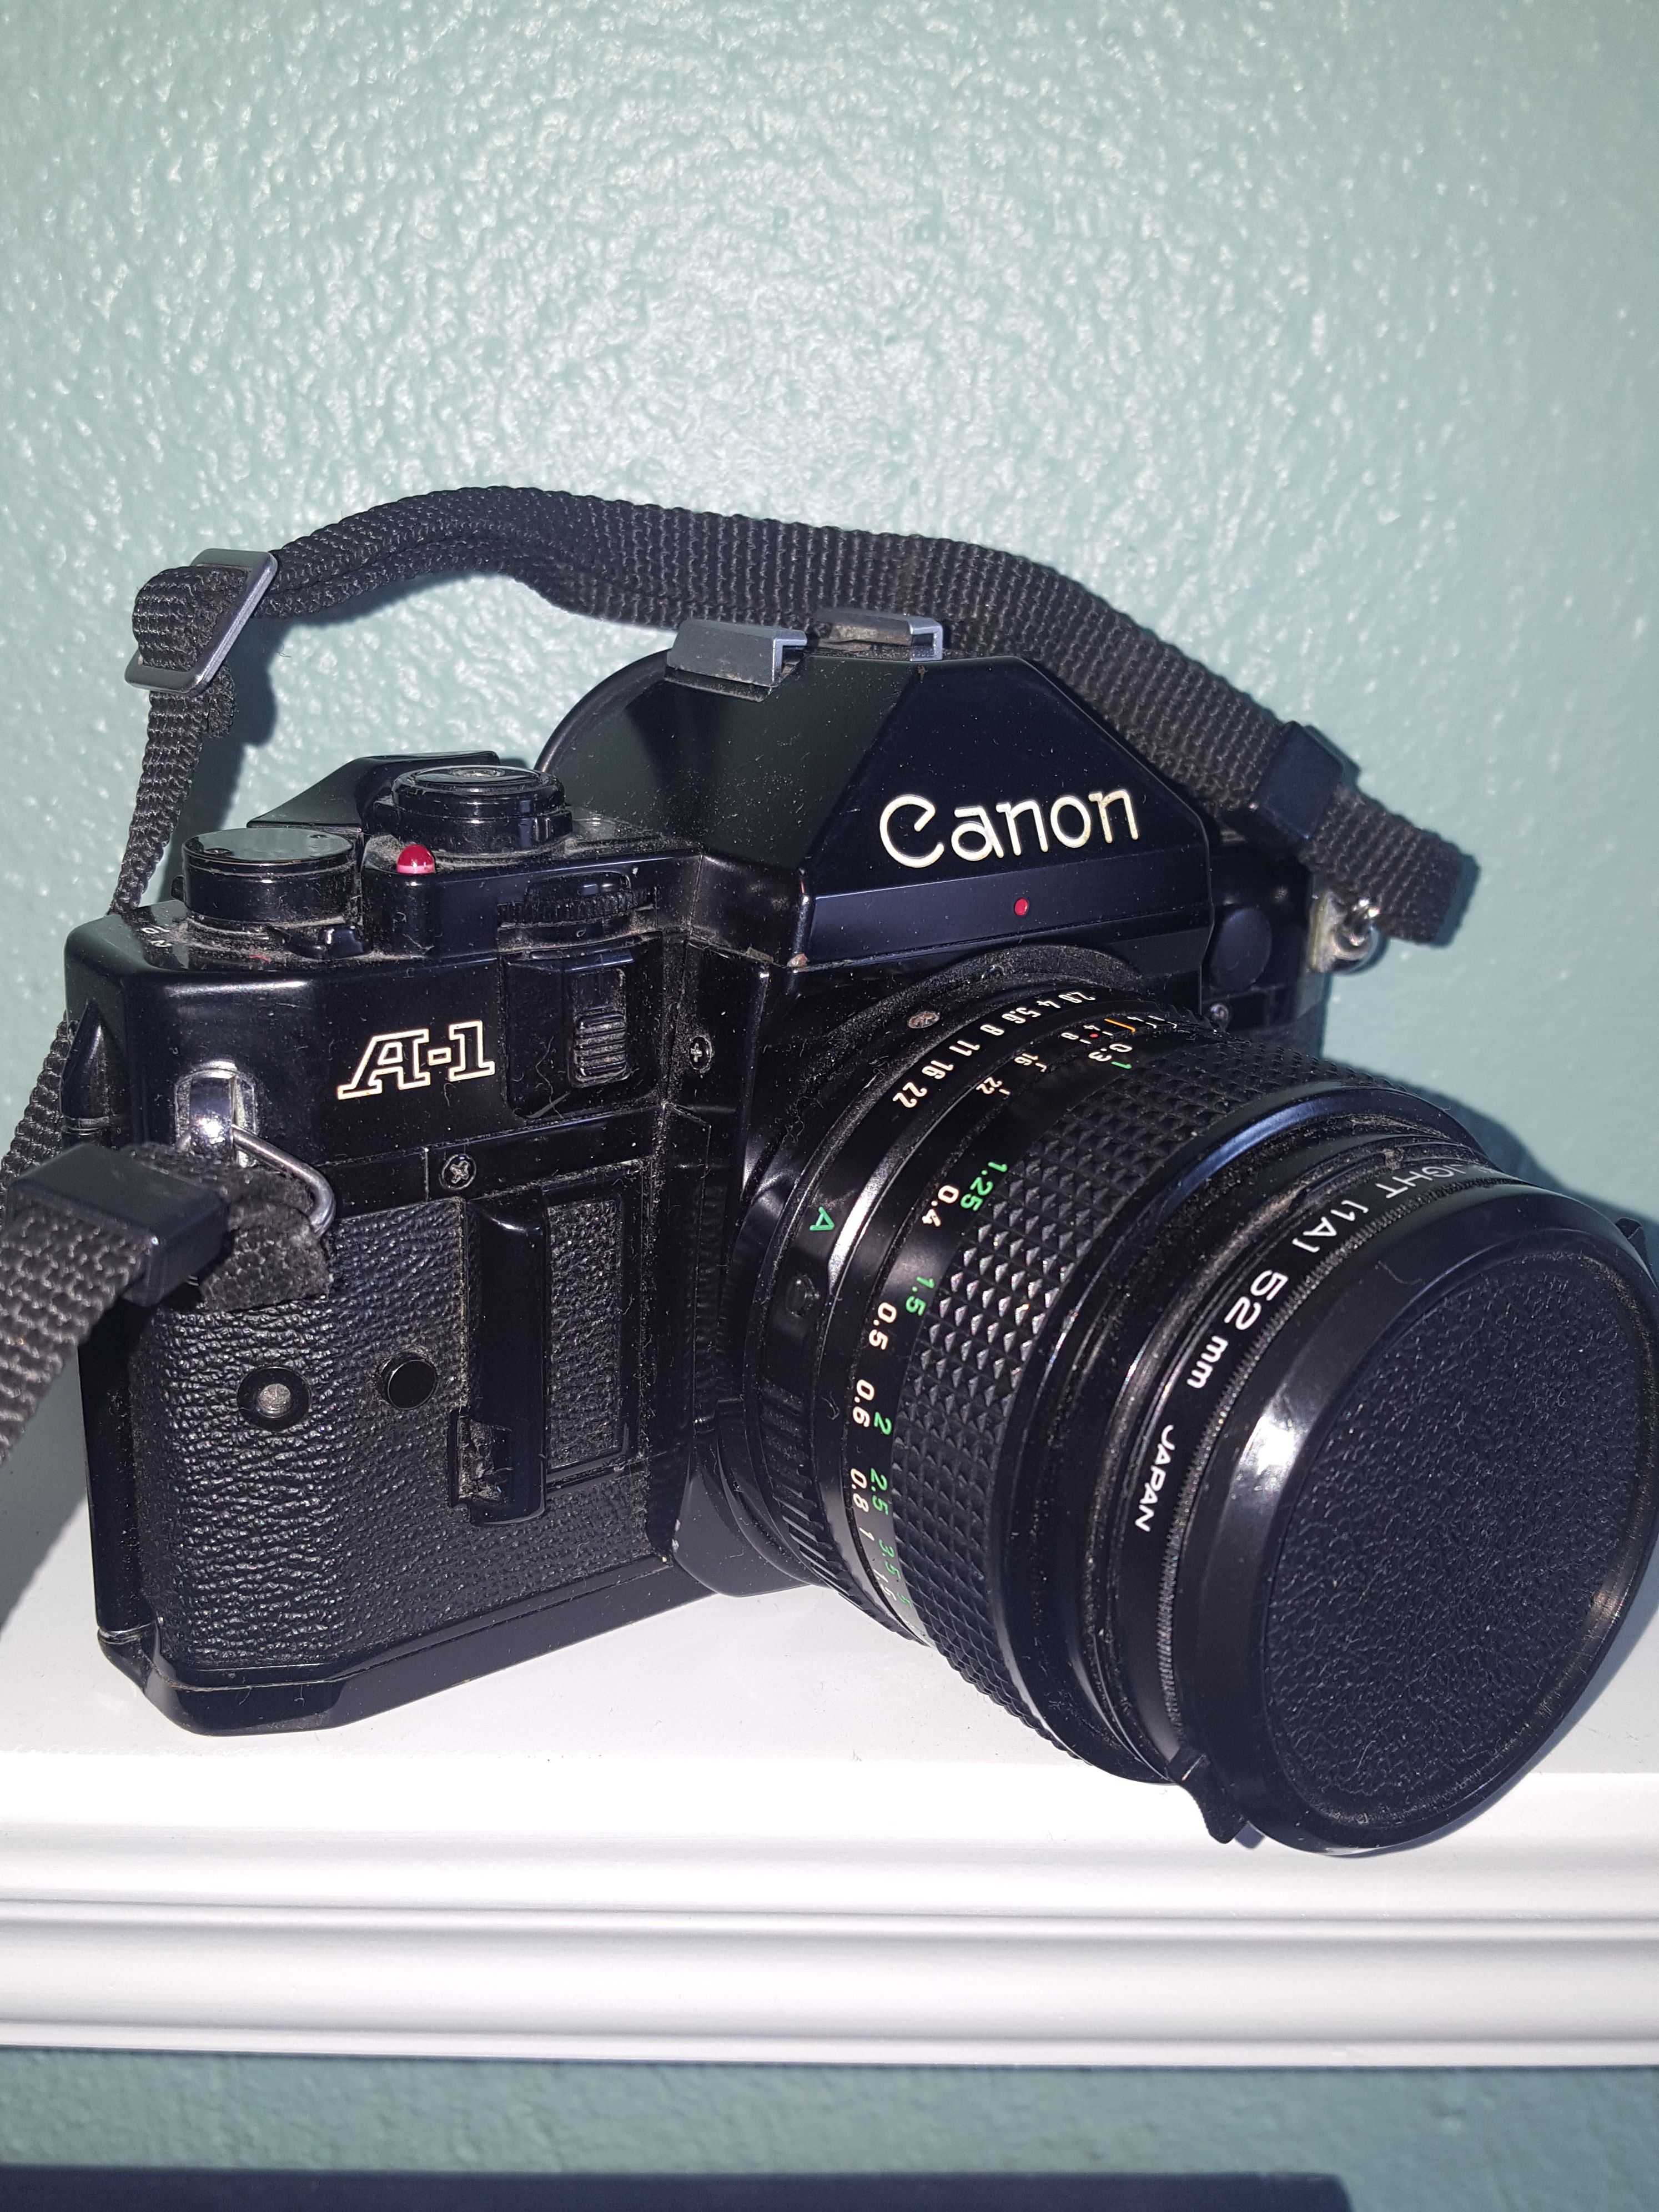 Cannon A-1 35 mm SLR Camera with 28mm Lens Kit (@ 1981)